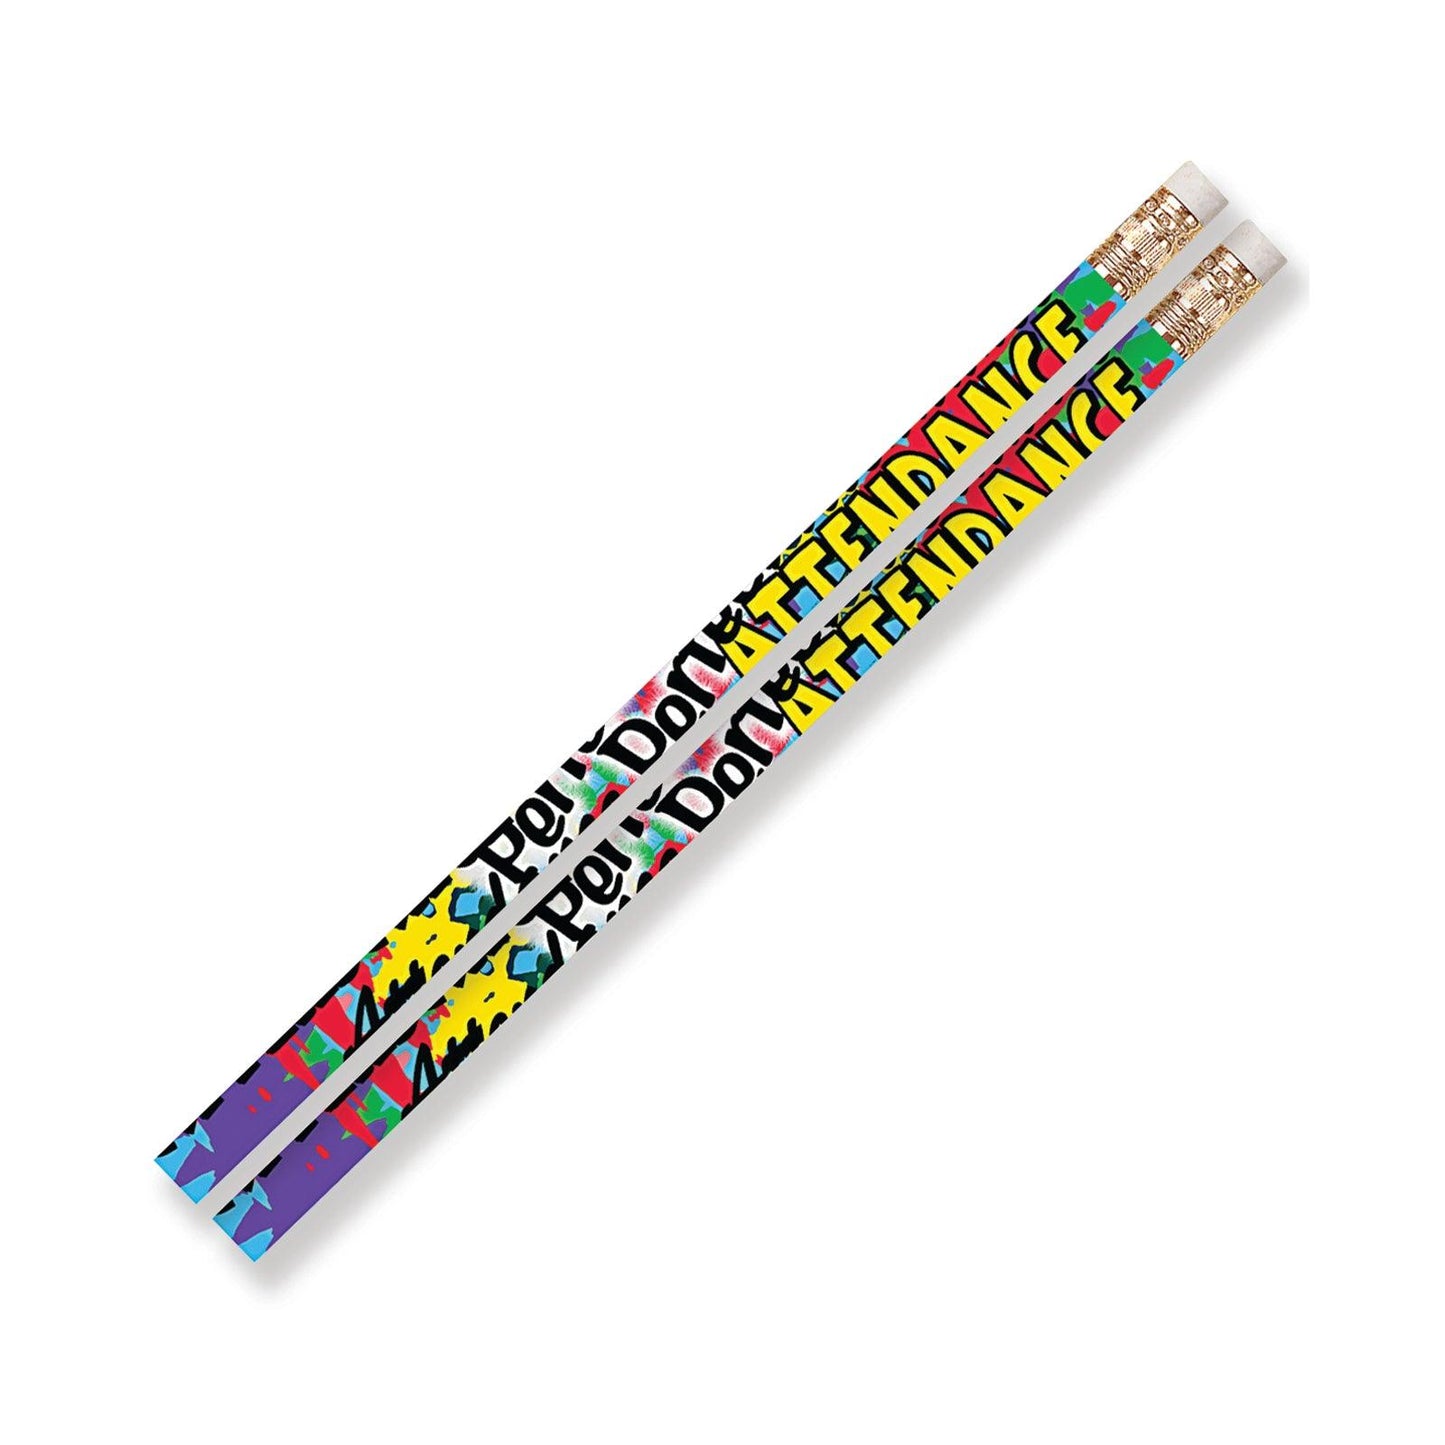 Perfect Attendance Motivational Pencil, Pack of 144 - Loomini